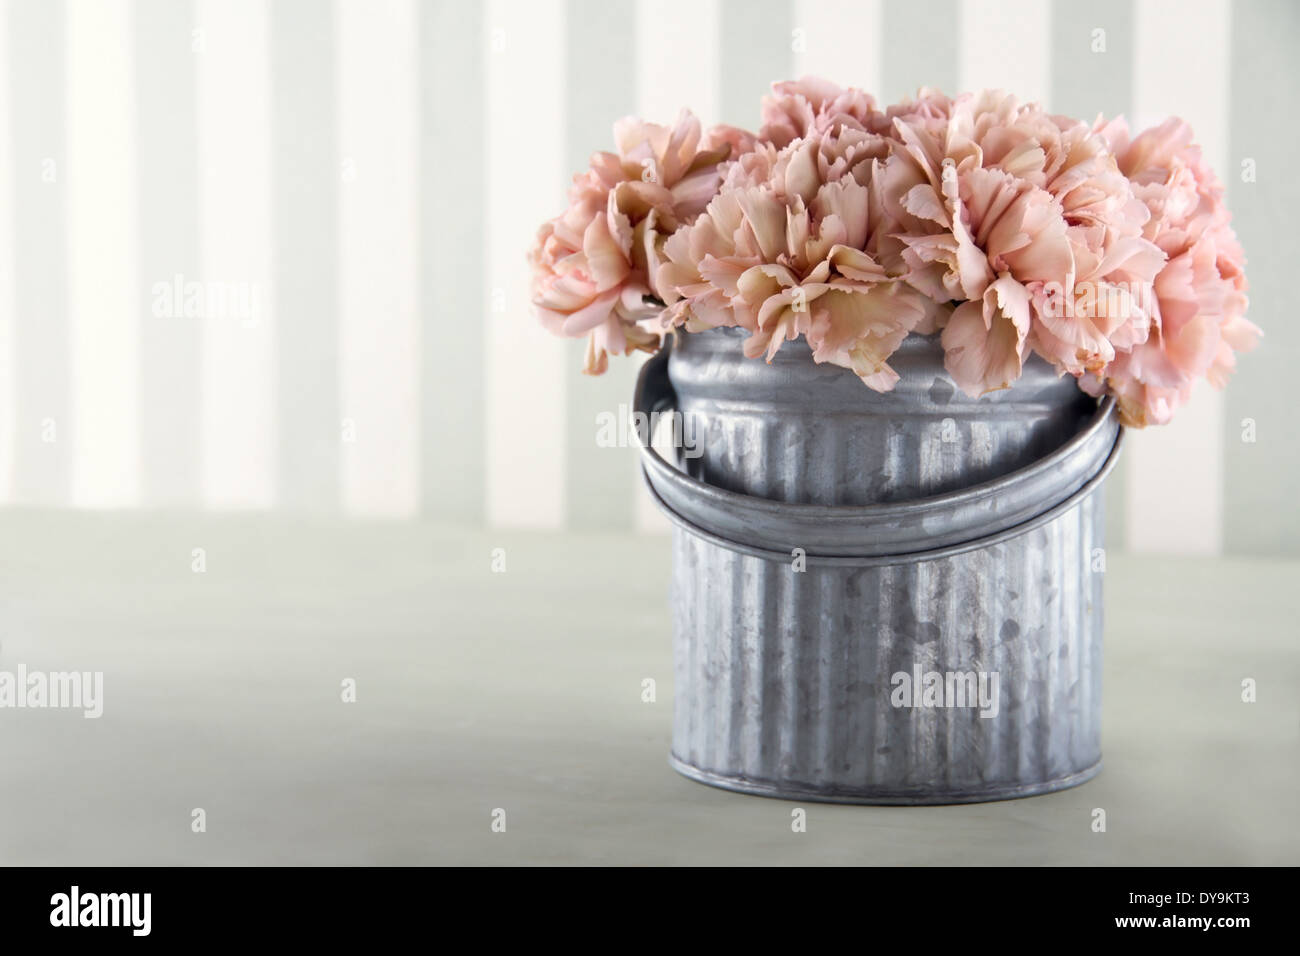 Apricot color carnation flowers in a metal bucket on vintage striped background with copy space Stock Photo